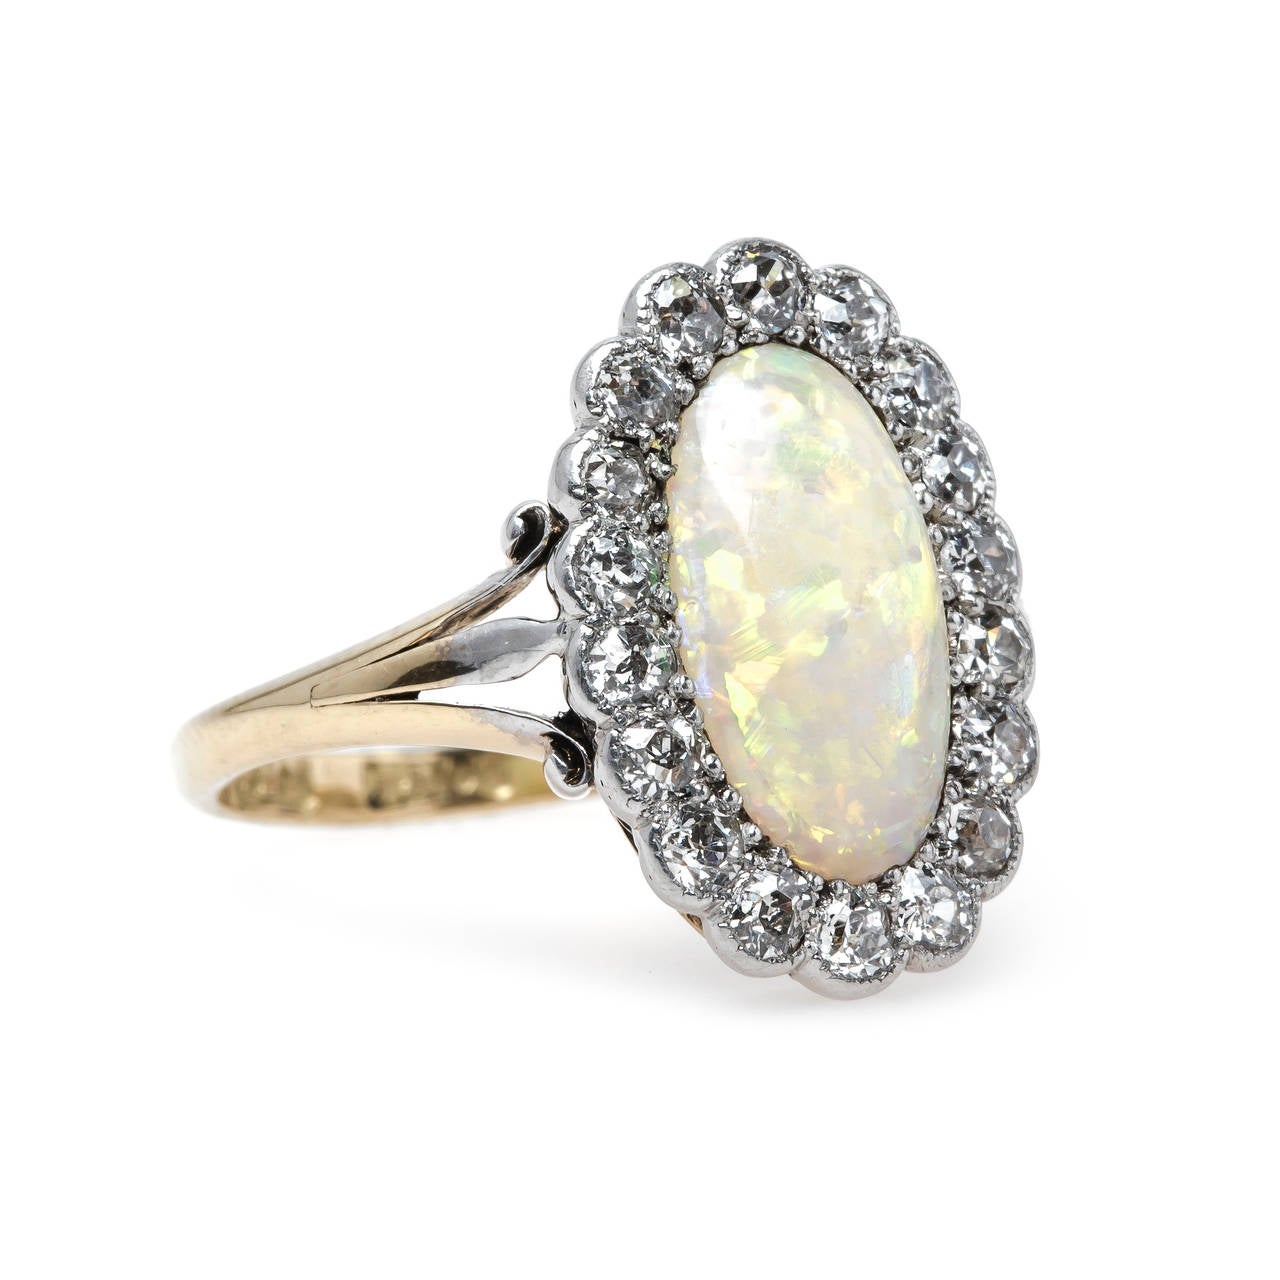 Argyle is a captivating authentic Victorian era (circa 1890) platinum topped 18k yellow gold ring centering an elongated oval cabochon opal gauged at 11.9mm x 6.4mm that glows warmly with a beautiful predominantly green and orange play-of-color.